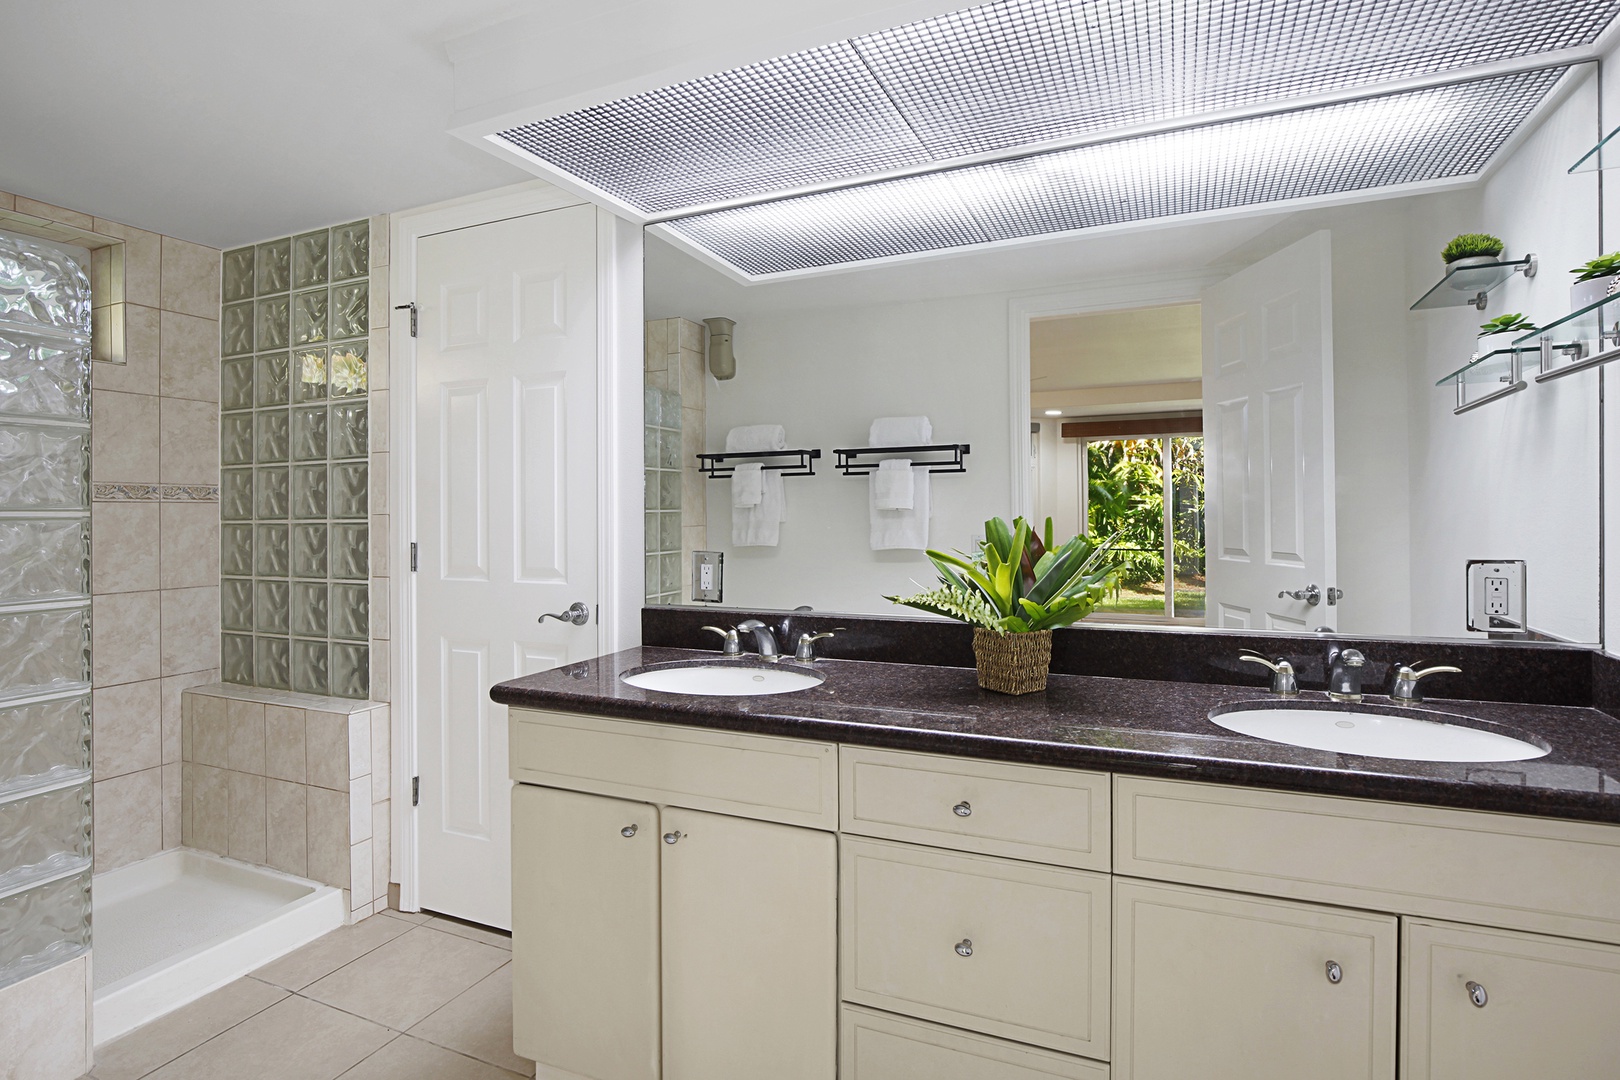 Princeville Vacation Rentals, Villas on the Prince #28 - private ensuite with dual vanities and a walk-in shower